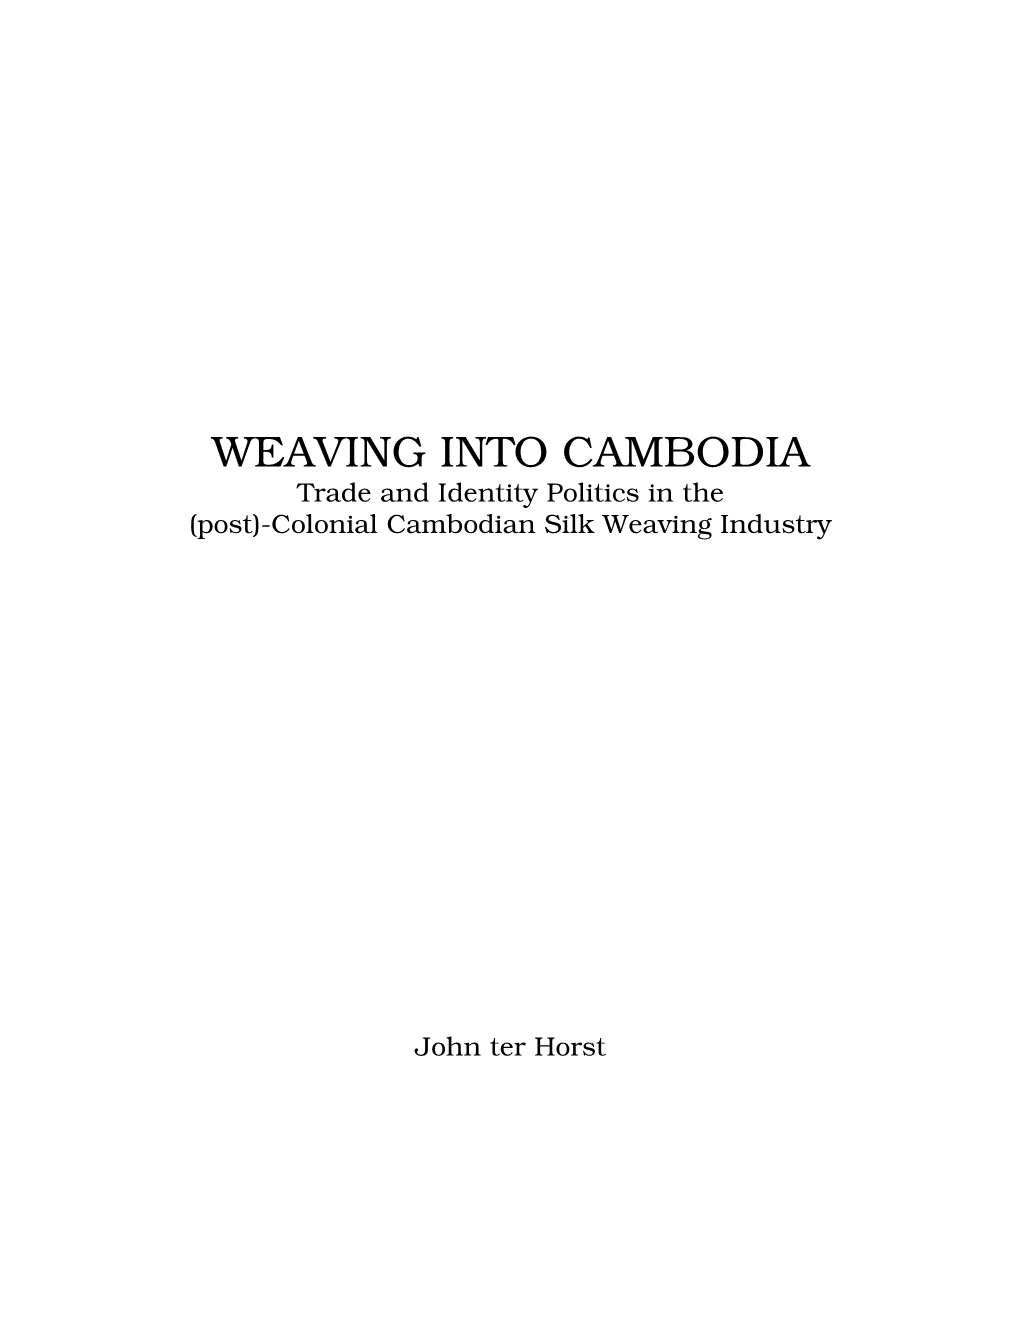 WEAVING INTO CAMBODIA Trade and Identity Politics in the (Post)-Colonial Cambodian Silk Weaving Industry